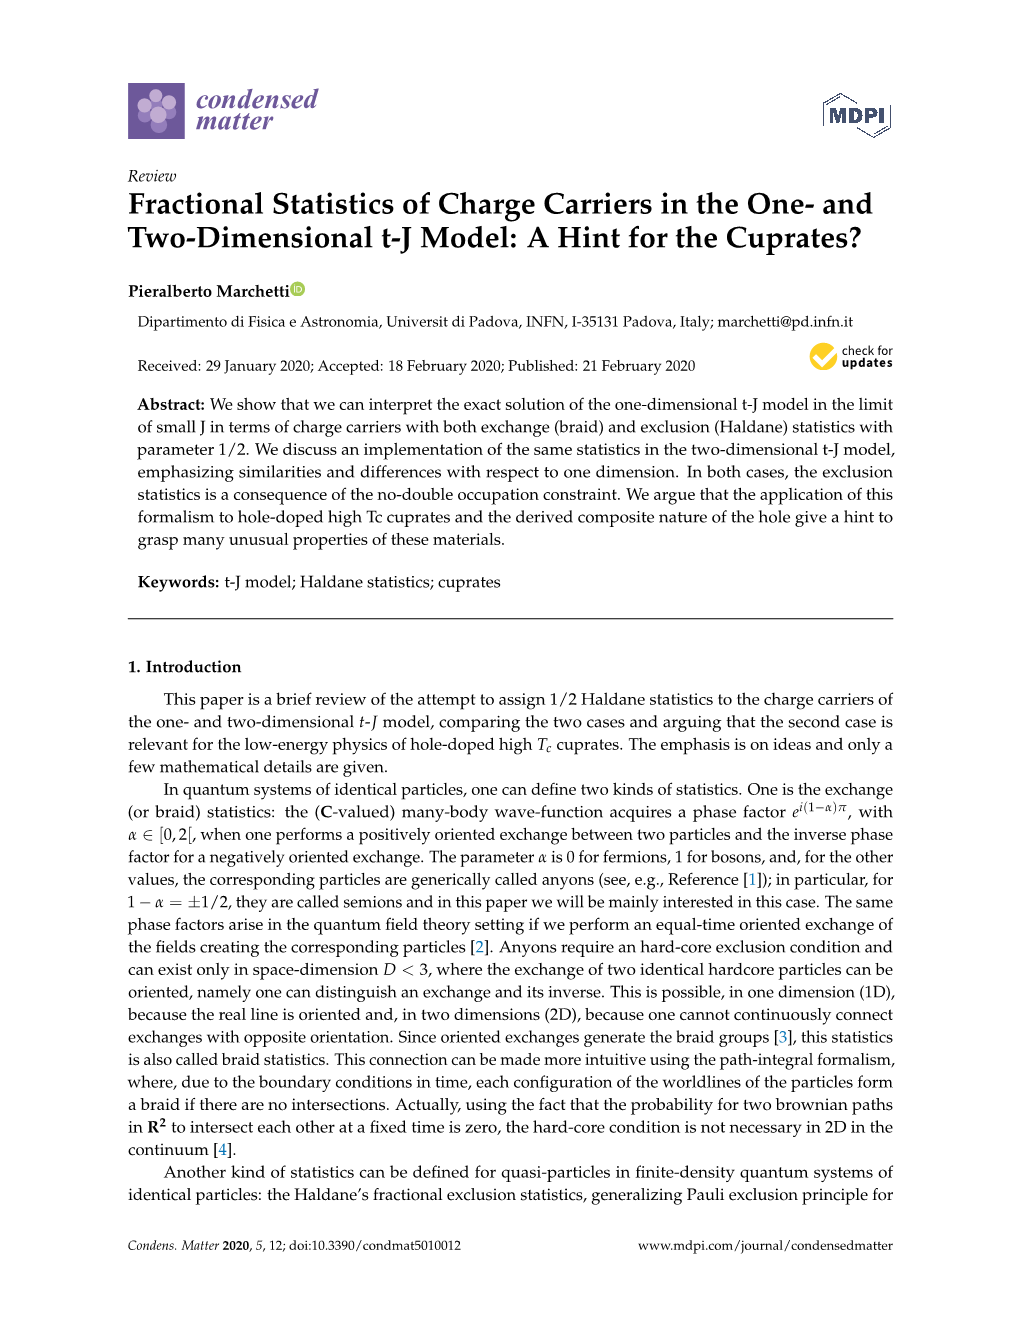 Fractional Statistics of Charge Carriers in the One- and Two-Dimensional T-J Model: a Hint for the Cuprates?